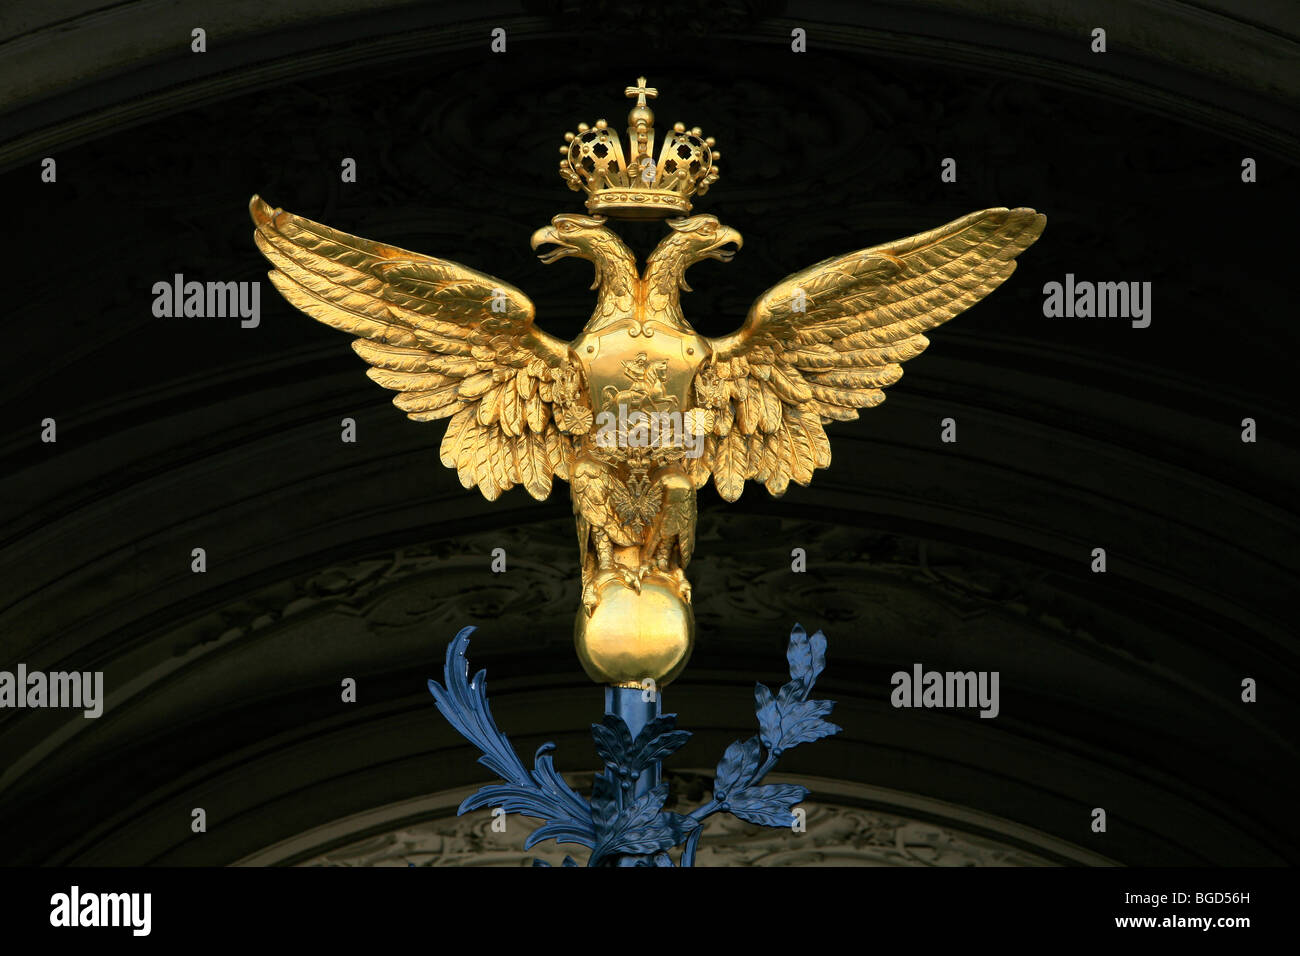 Double-headed eagle on the main entrance gate to the Winter Palace in Saint Petersburg, Russia Stock Photo